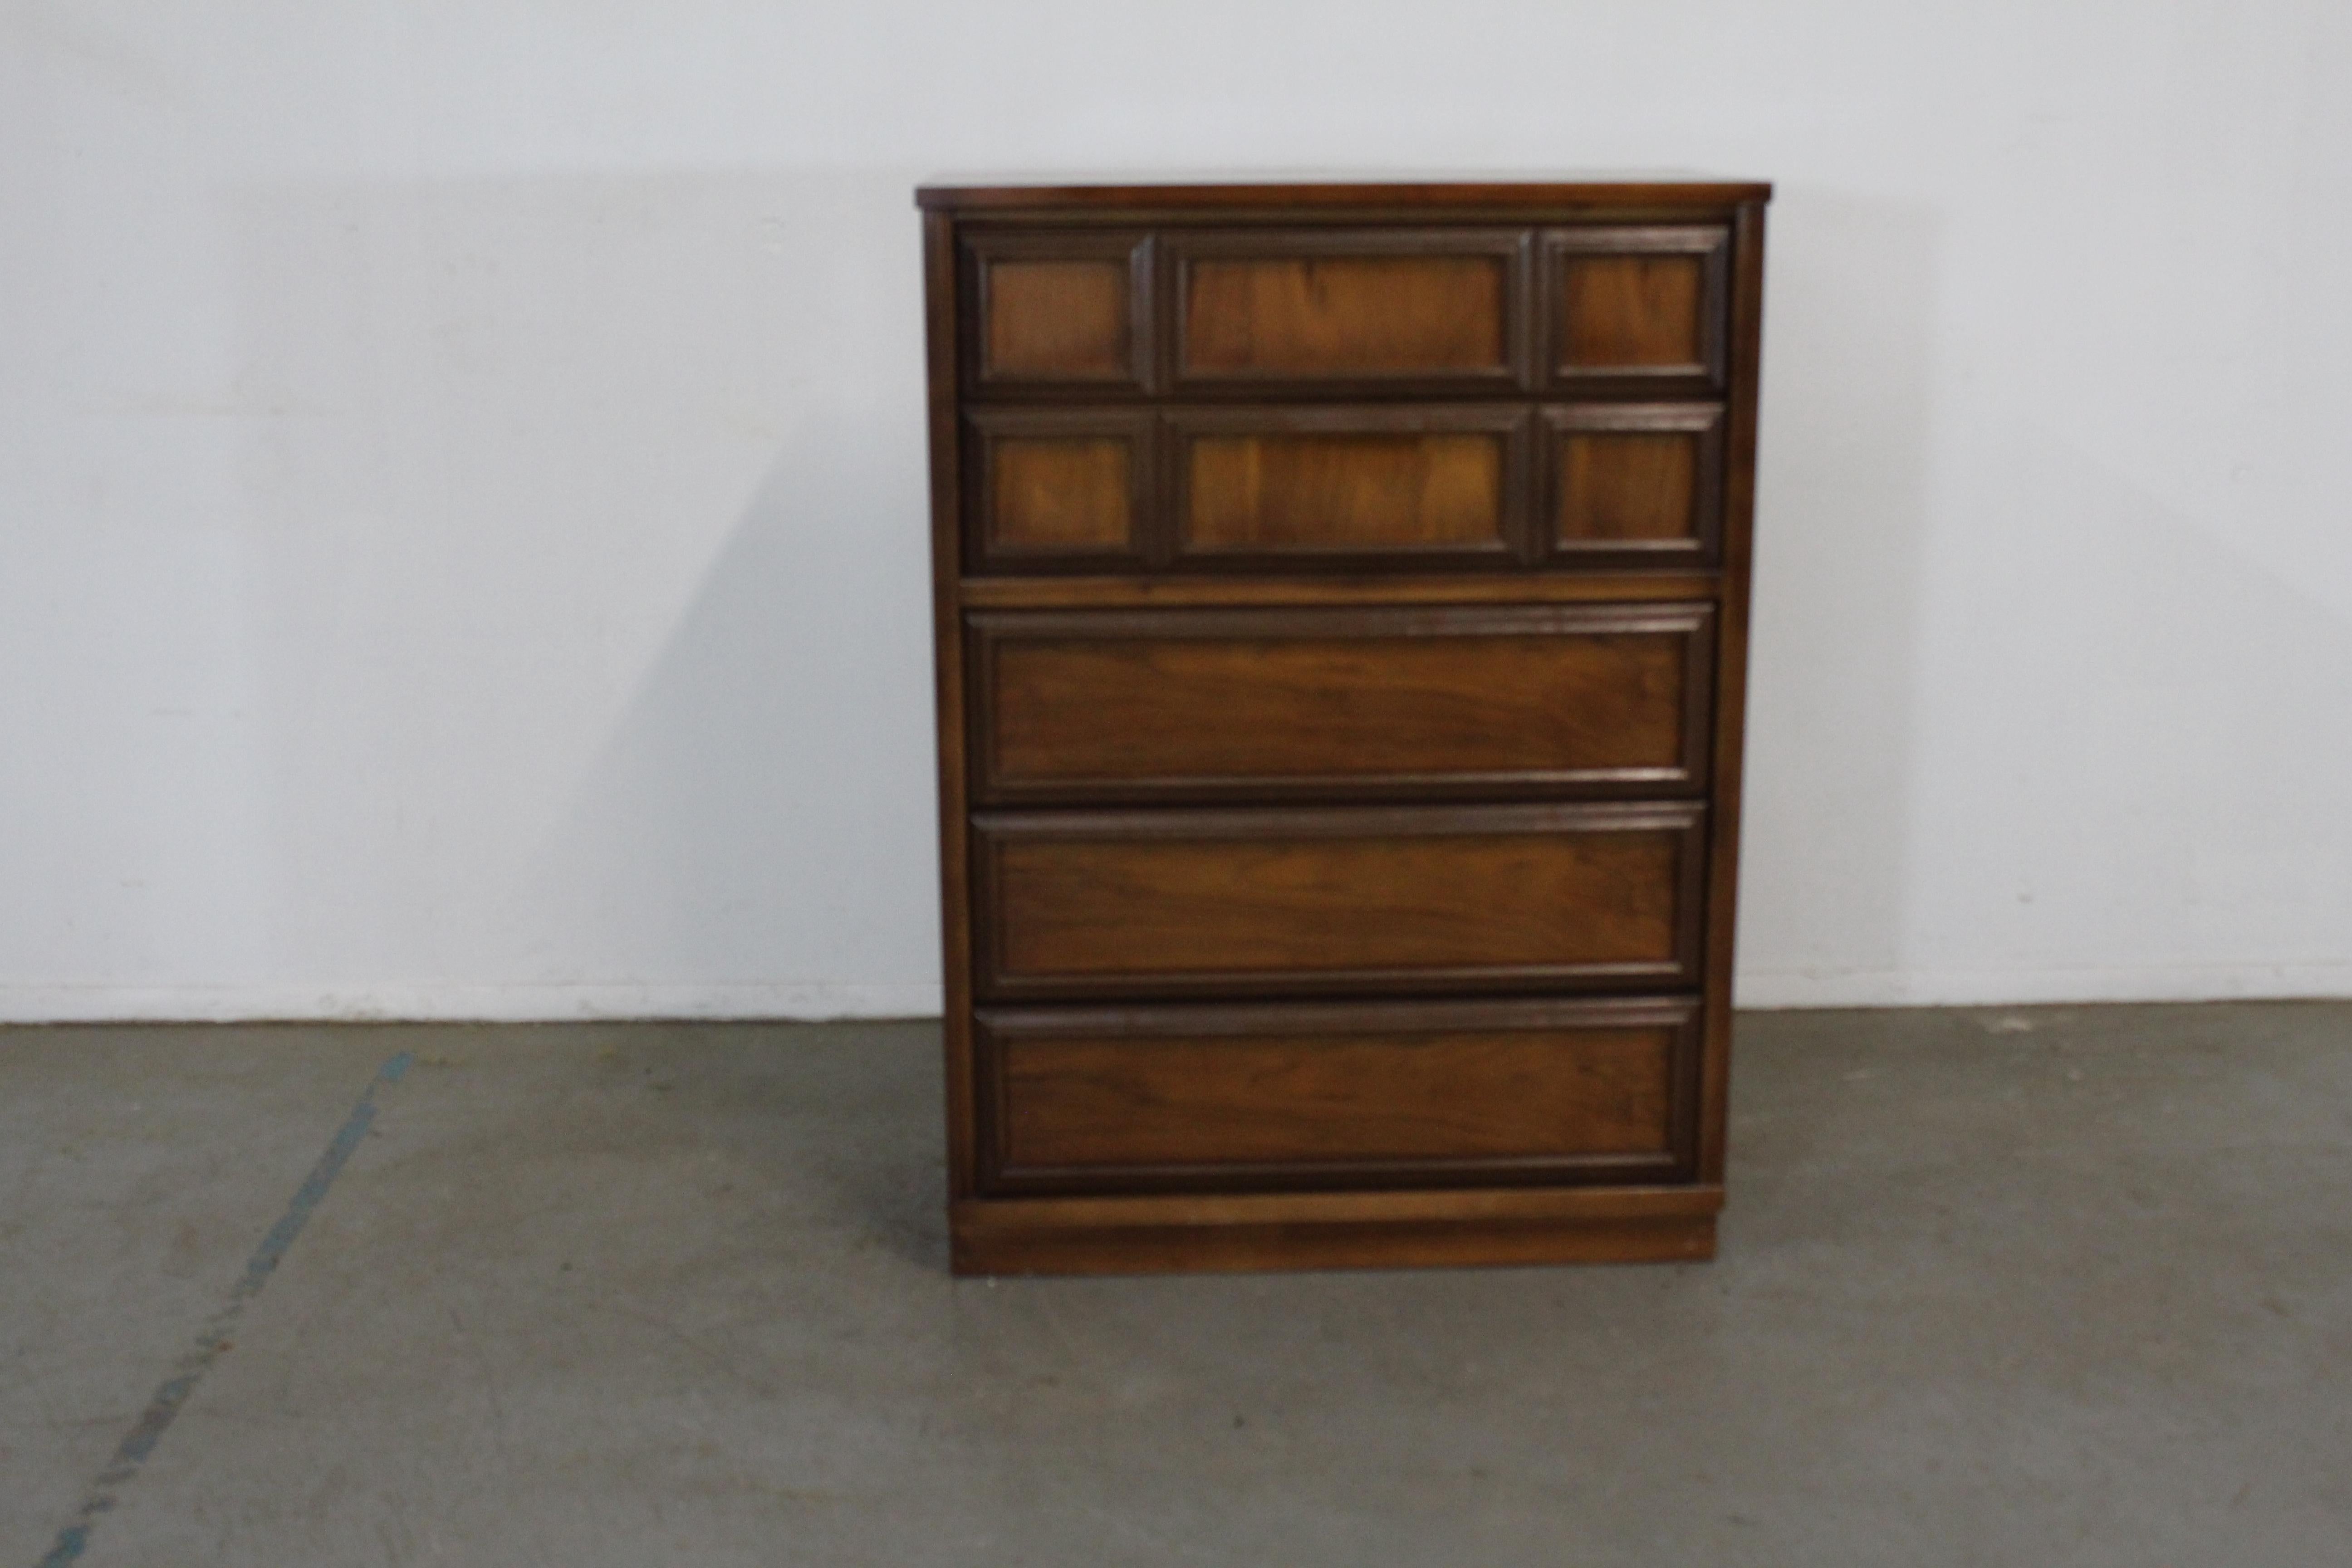 Mid-Century Modern walnut gentleman's tall chest.

Offered is an excellent example of American Mid-Century Modern design; a walnut dresser from the 1960's. Features dovetailed drawers with Walnut trim and sculpted pulls. It is in good condition